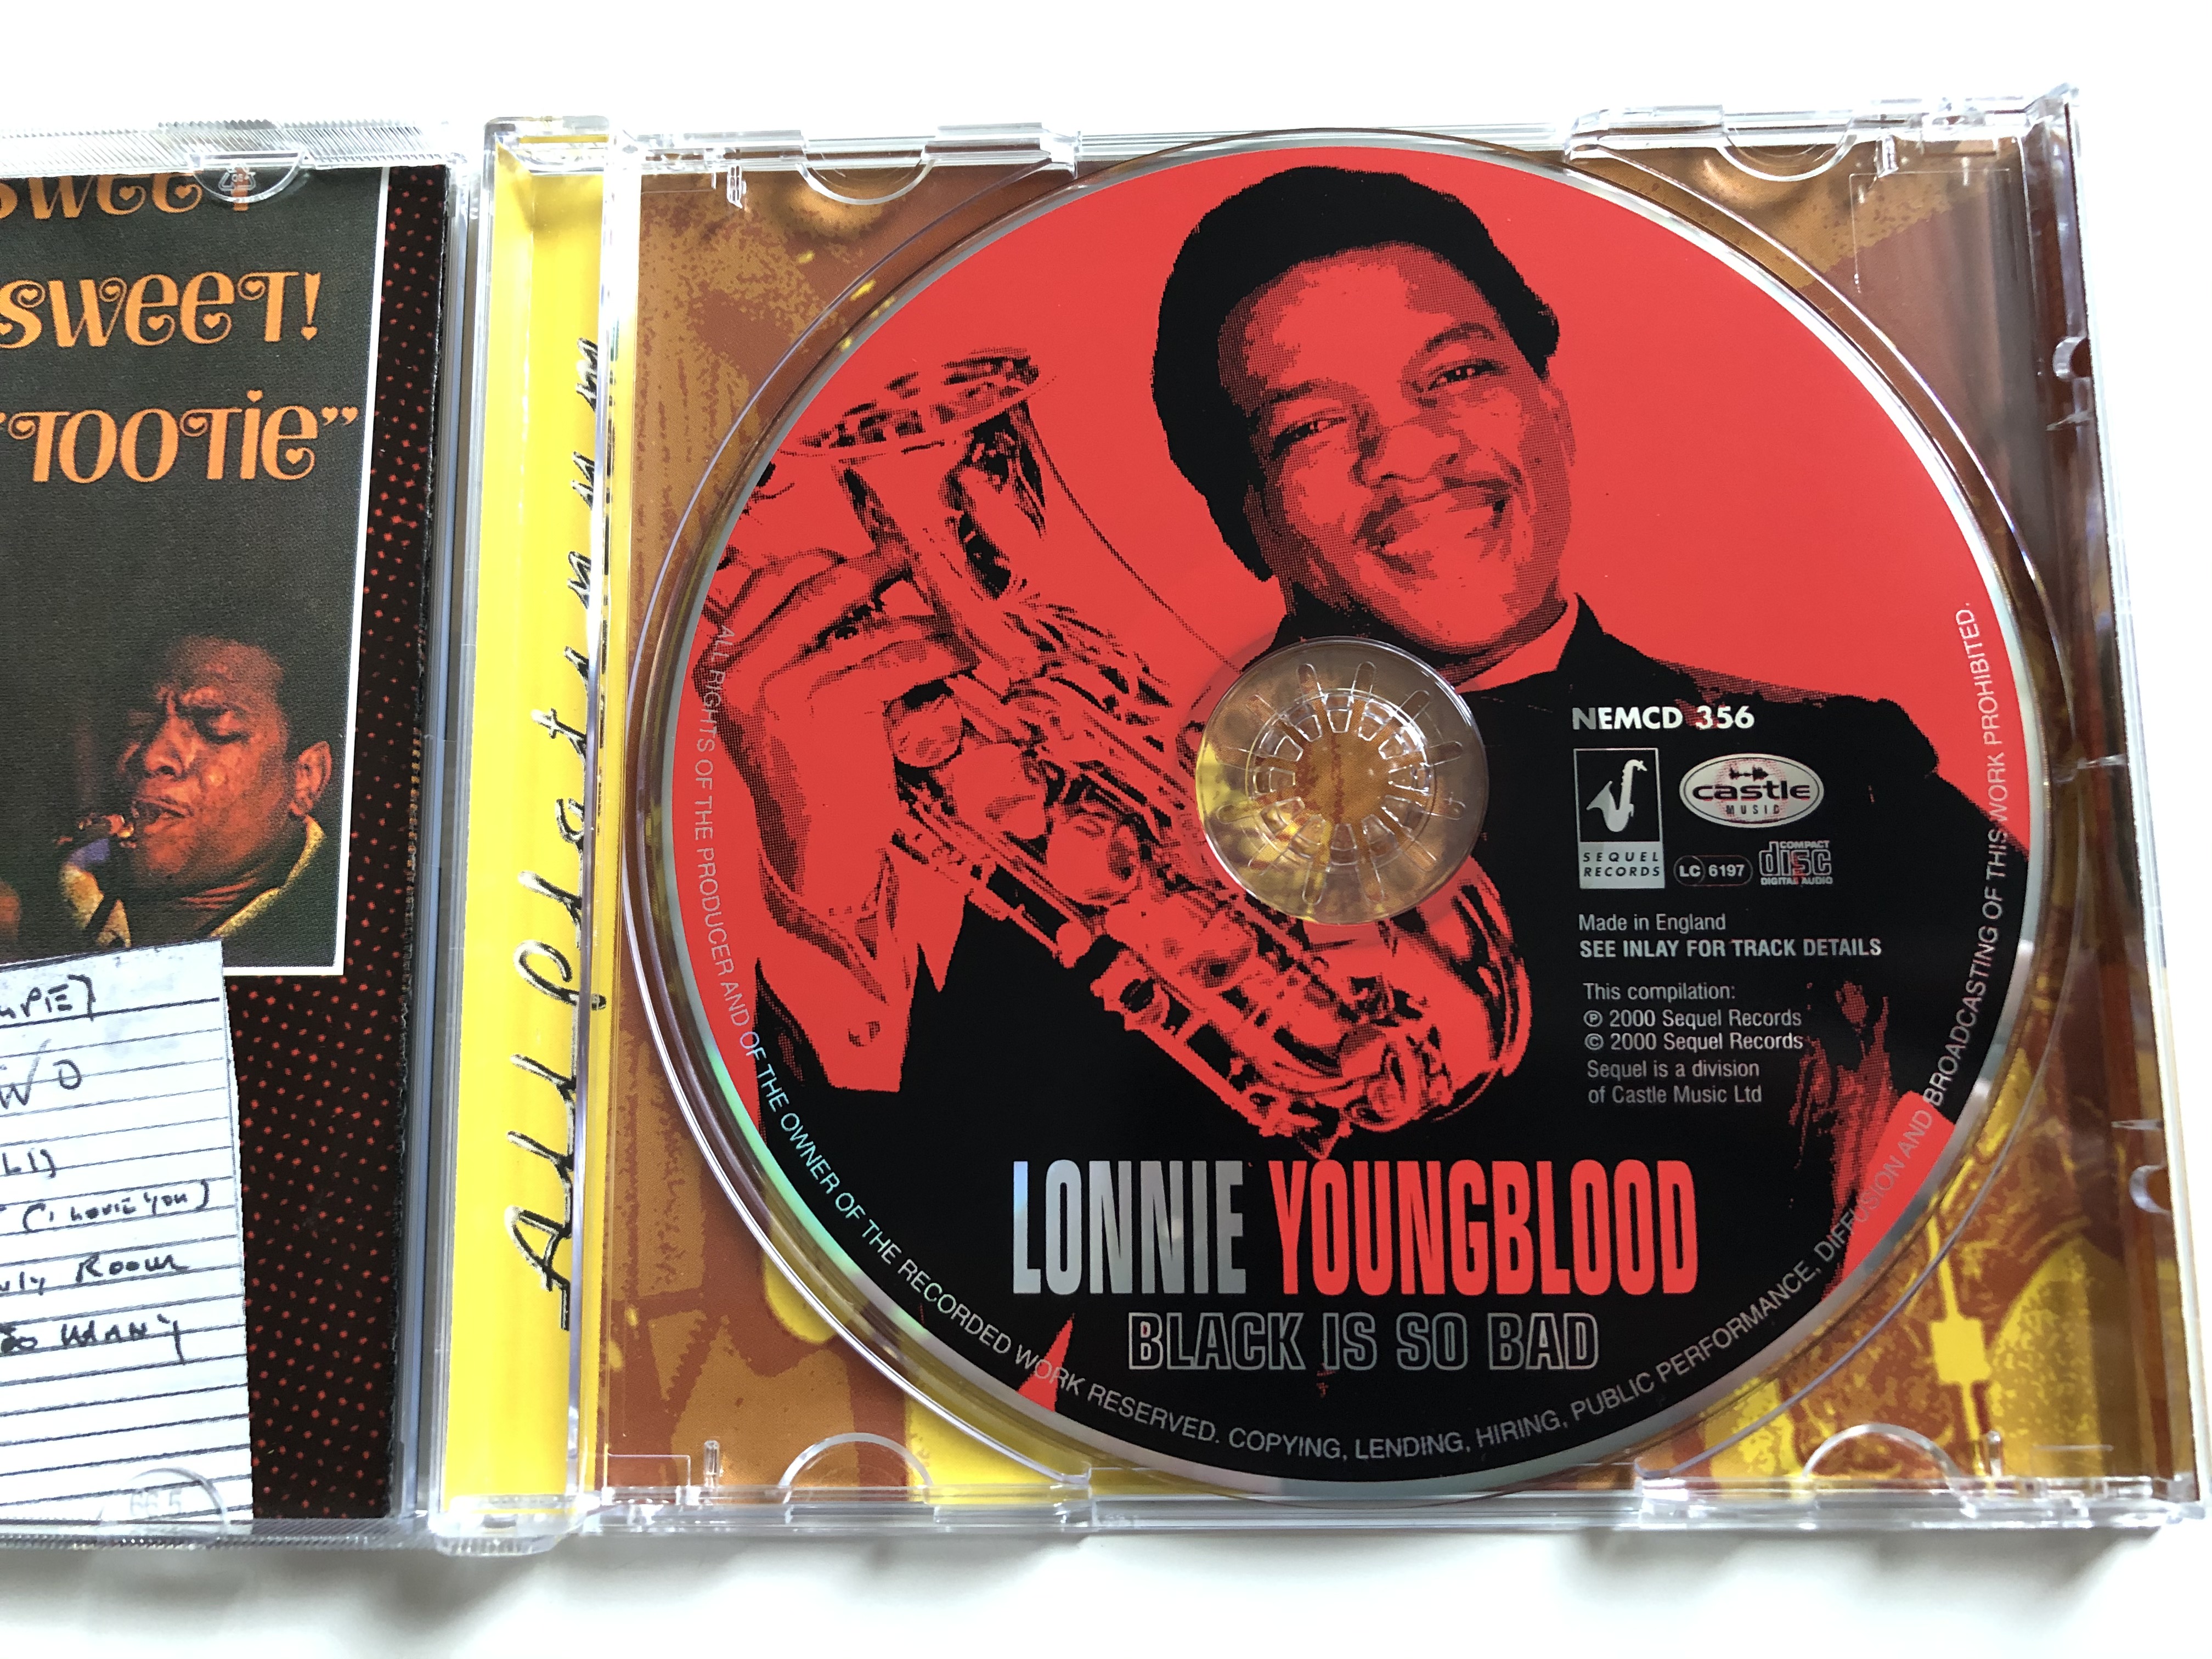 lonnie-youngblood-black-is-so-bad-sequel-records-audio-cd-2000-nemcd-356-5-.jpg